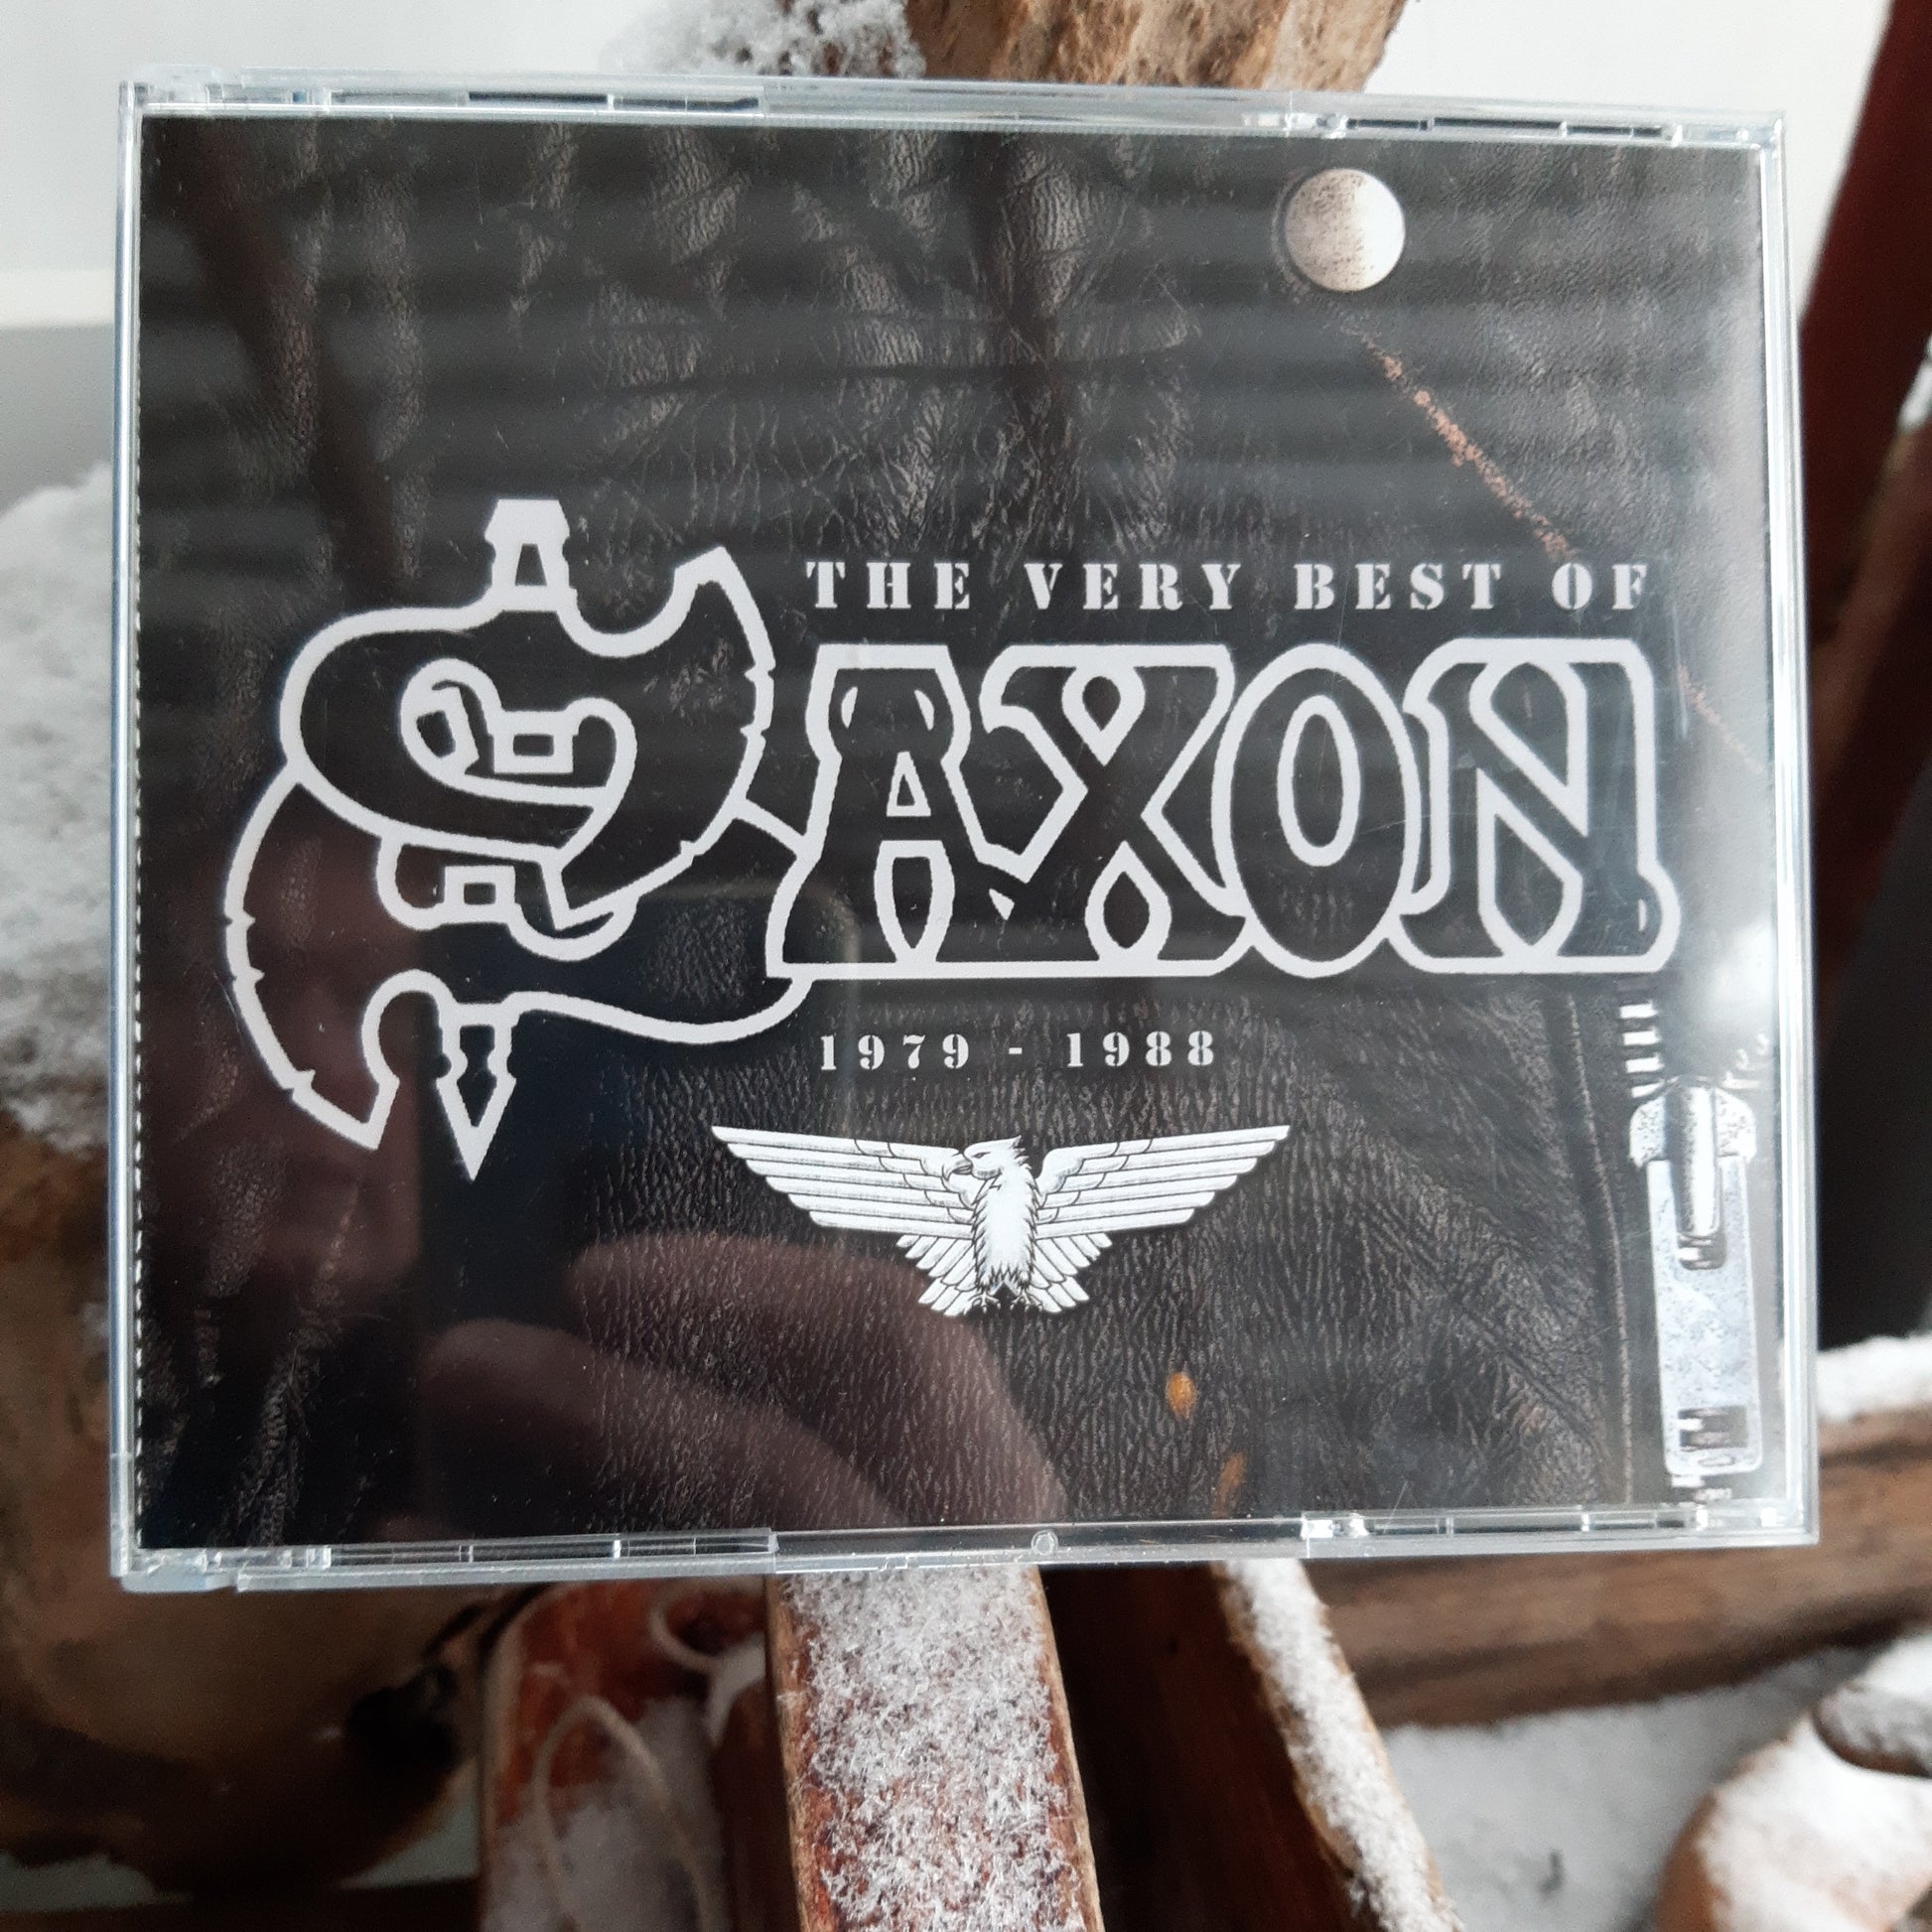 saxon - the very best of - 3 cd